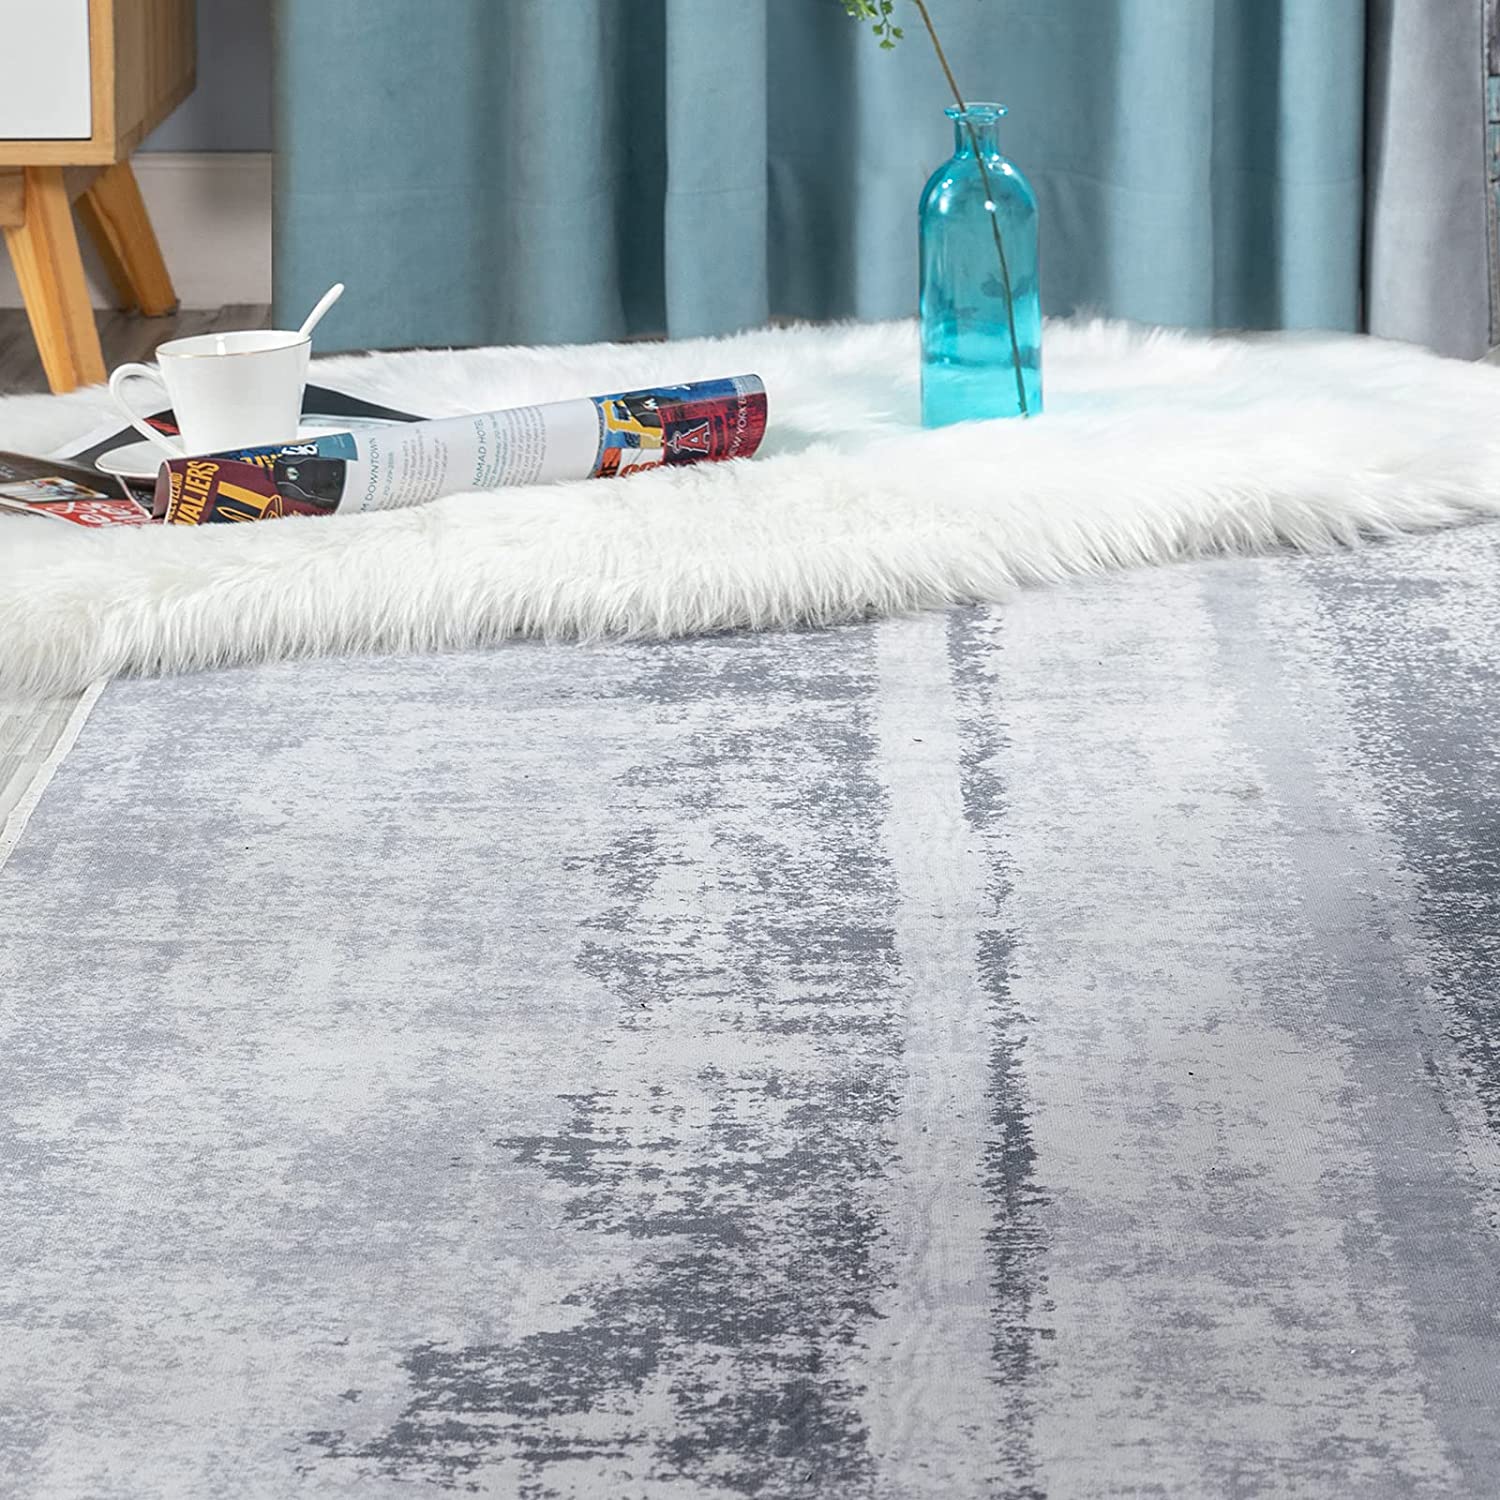 Modern Contemporary Modern Abstract Grey Area Rugs